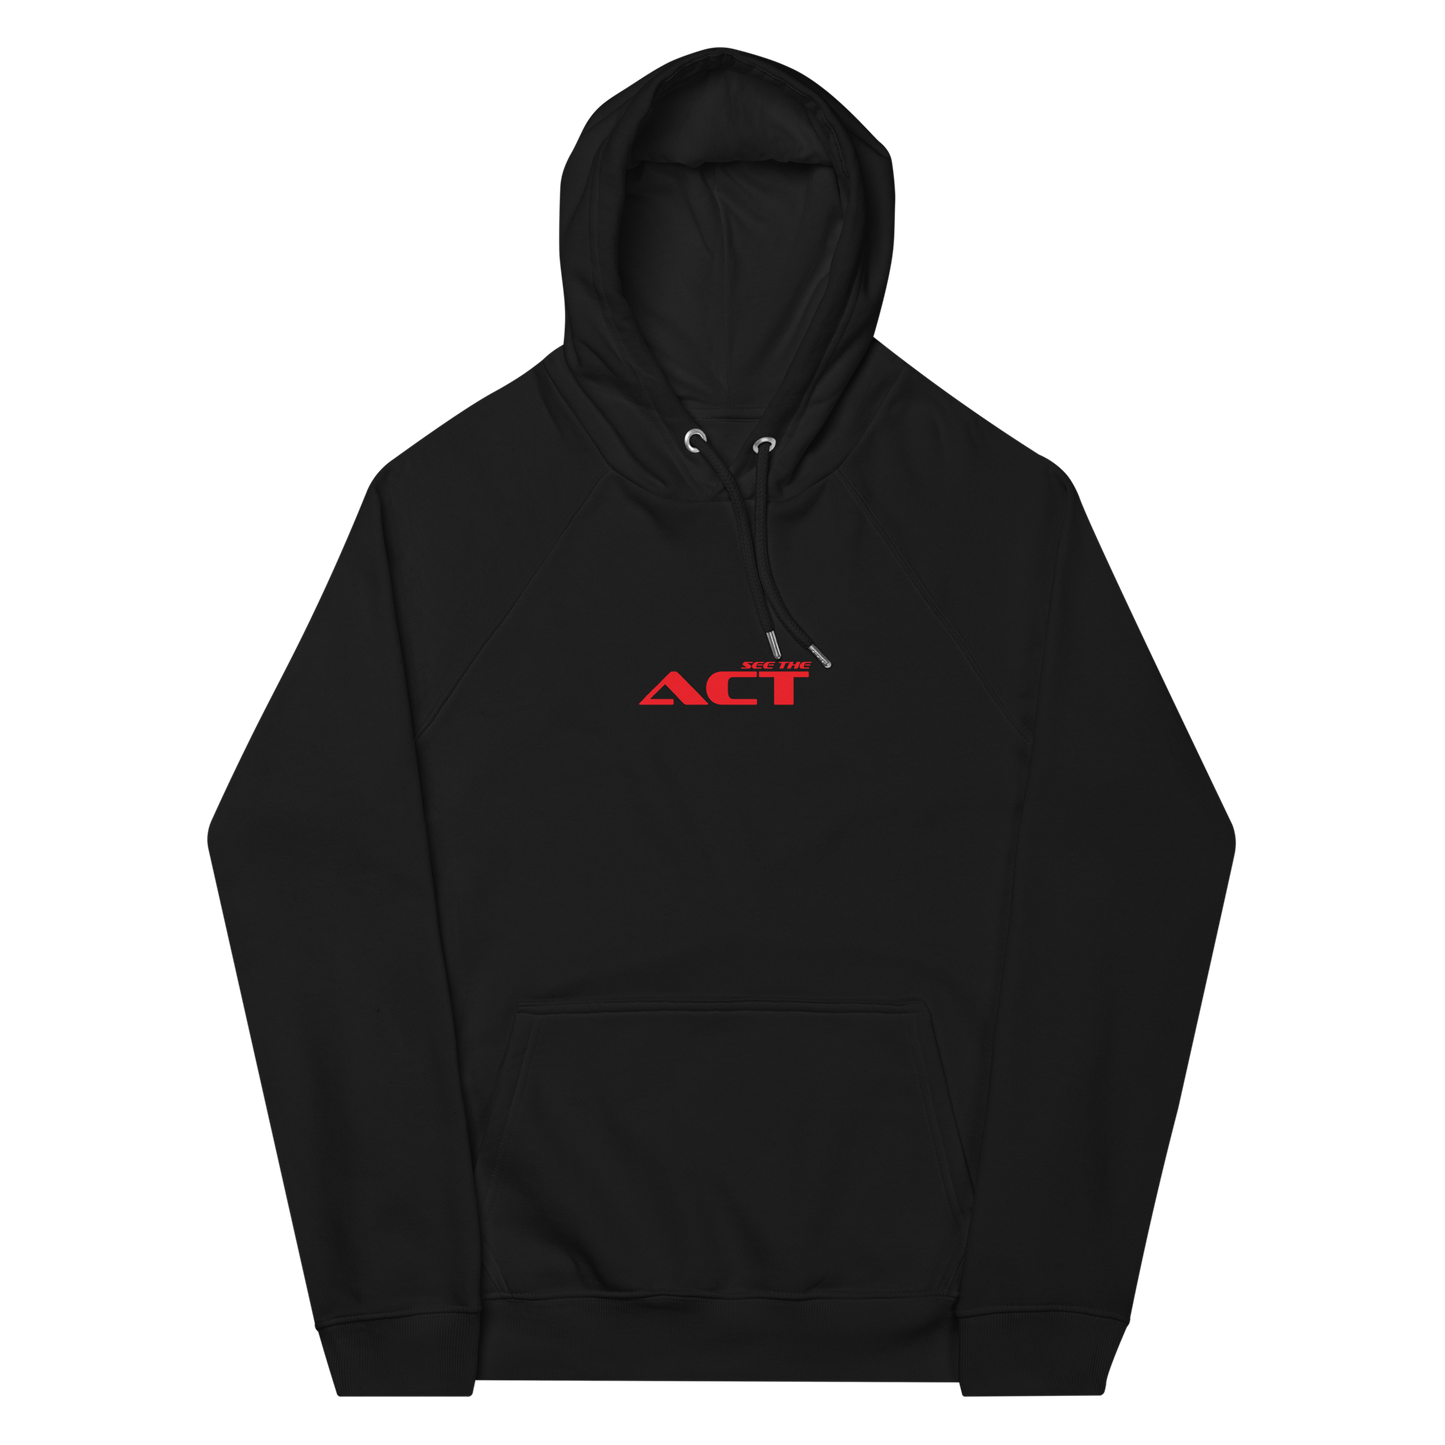 SEE THE ACT HOODIE